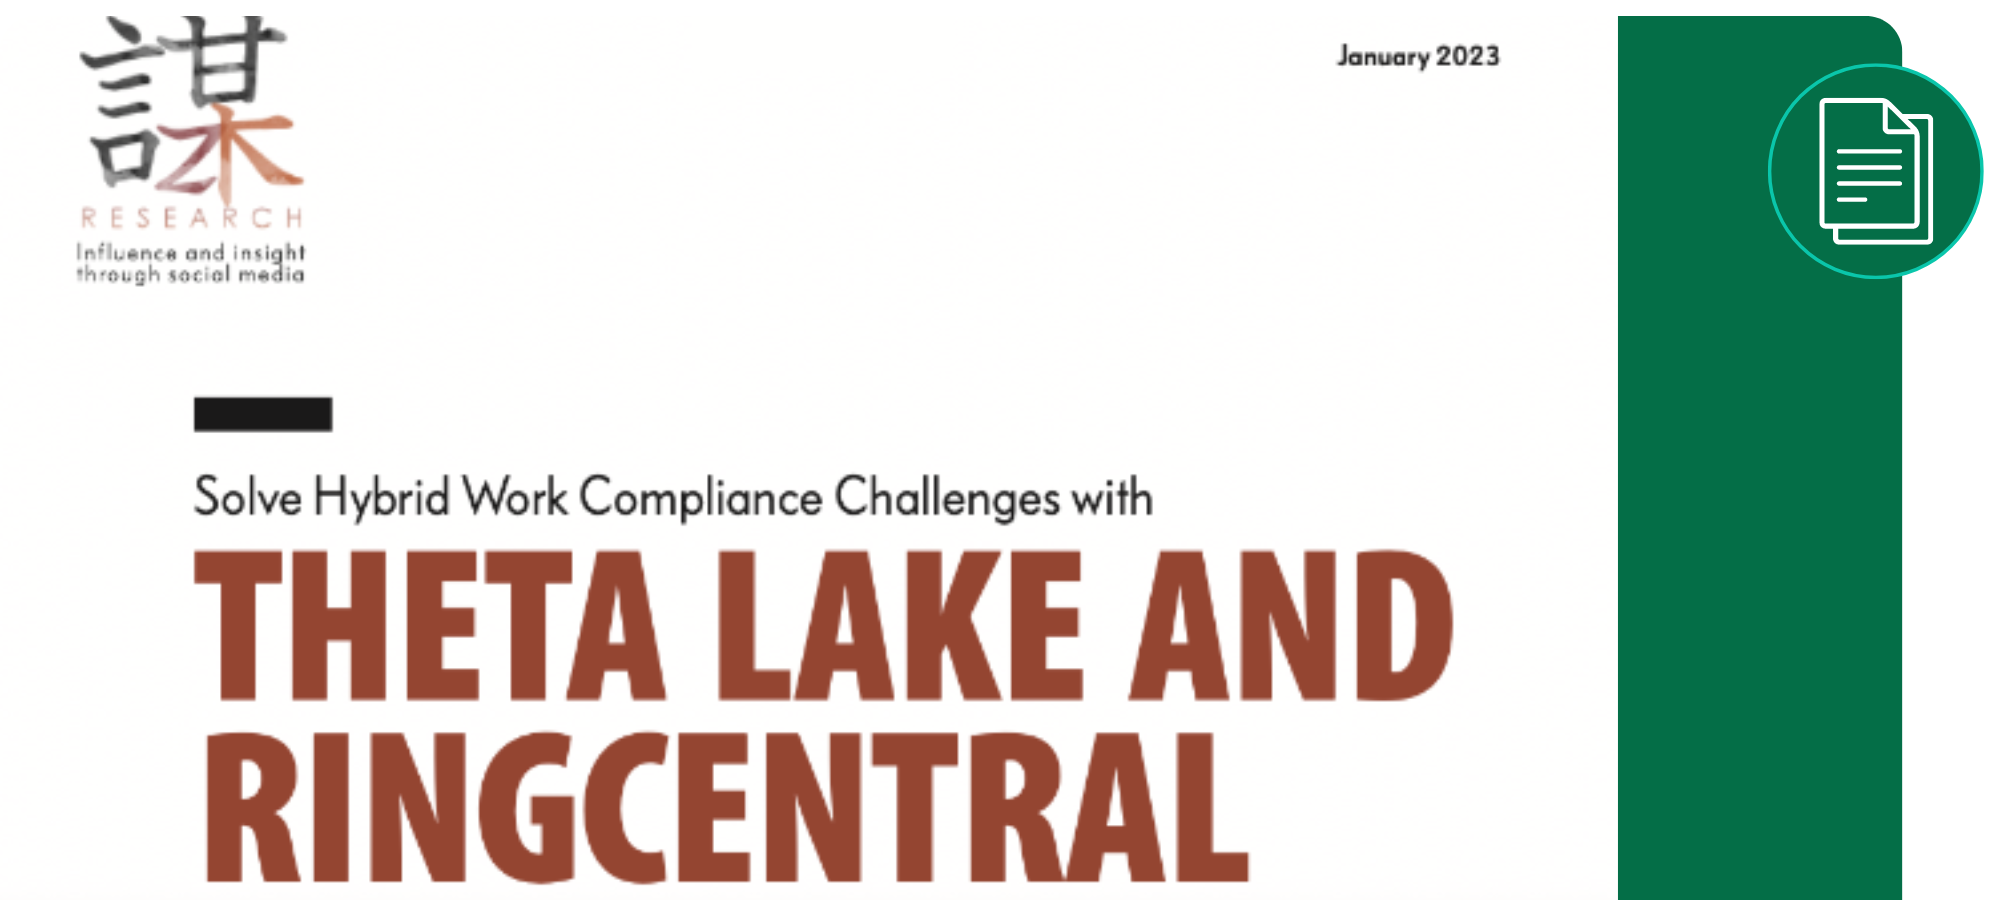 WhitePaper ThetaLake and RingCentral ZKResearch